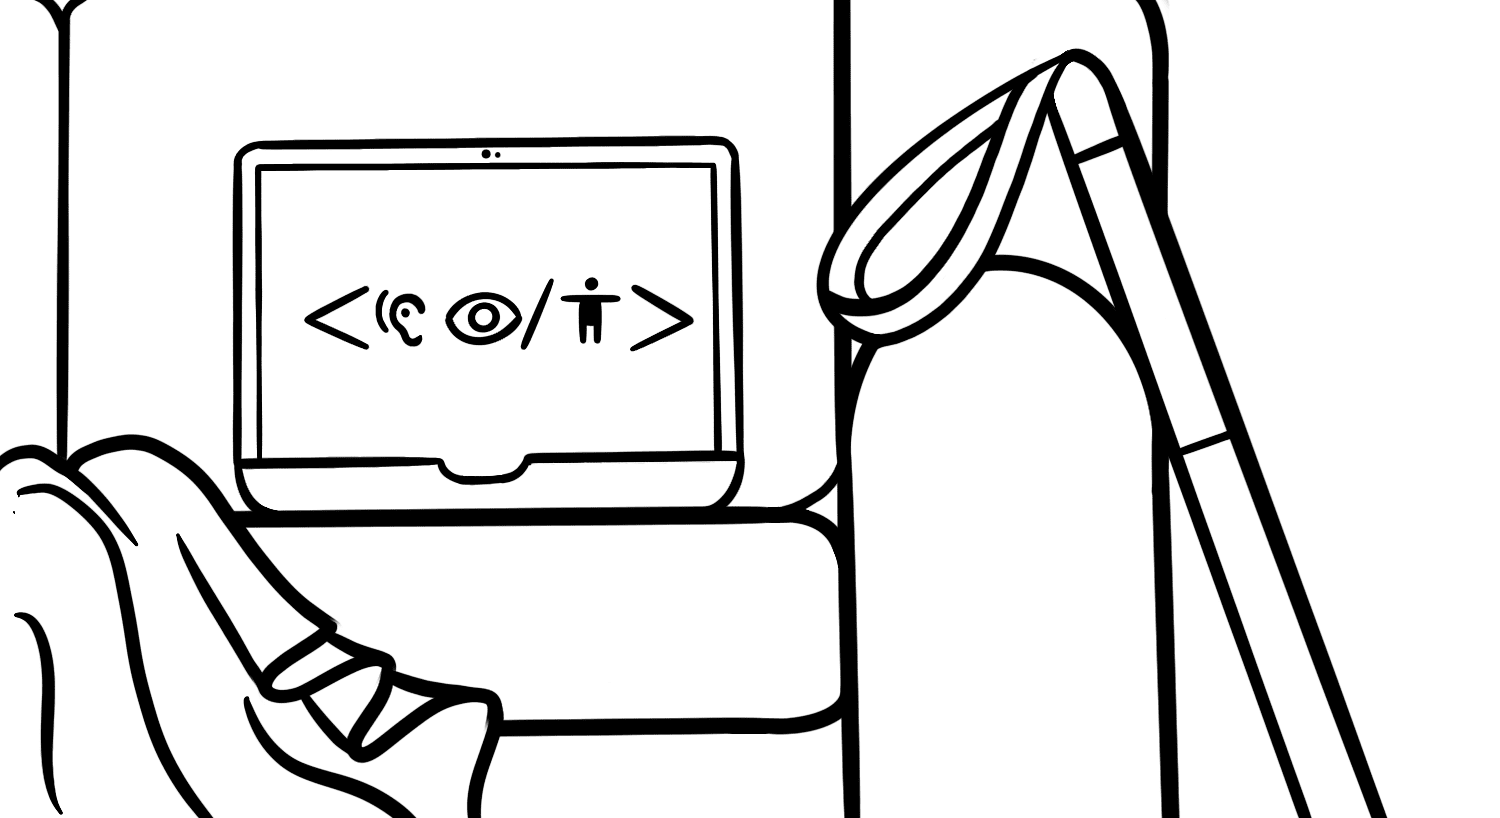 Illustration: A laptop sits open on a couch, with a blanket draped to one side and a guide cane leaning on the couch’s arm. The laptop displays an ear, eye, and the a11y symbol between coding brackets.